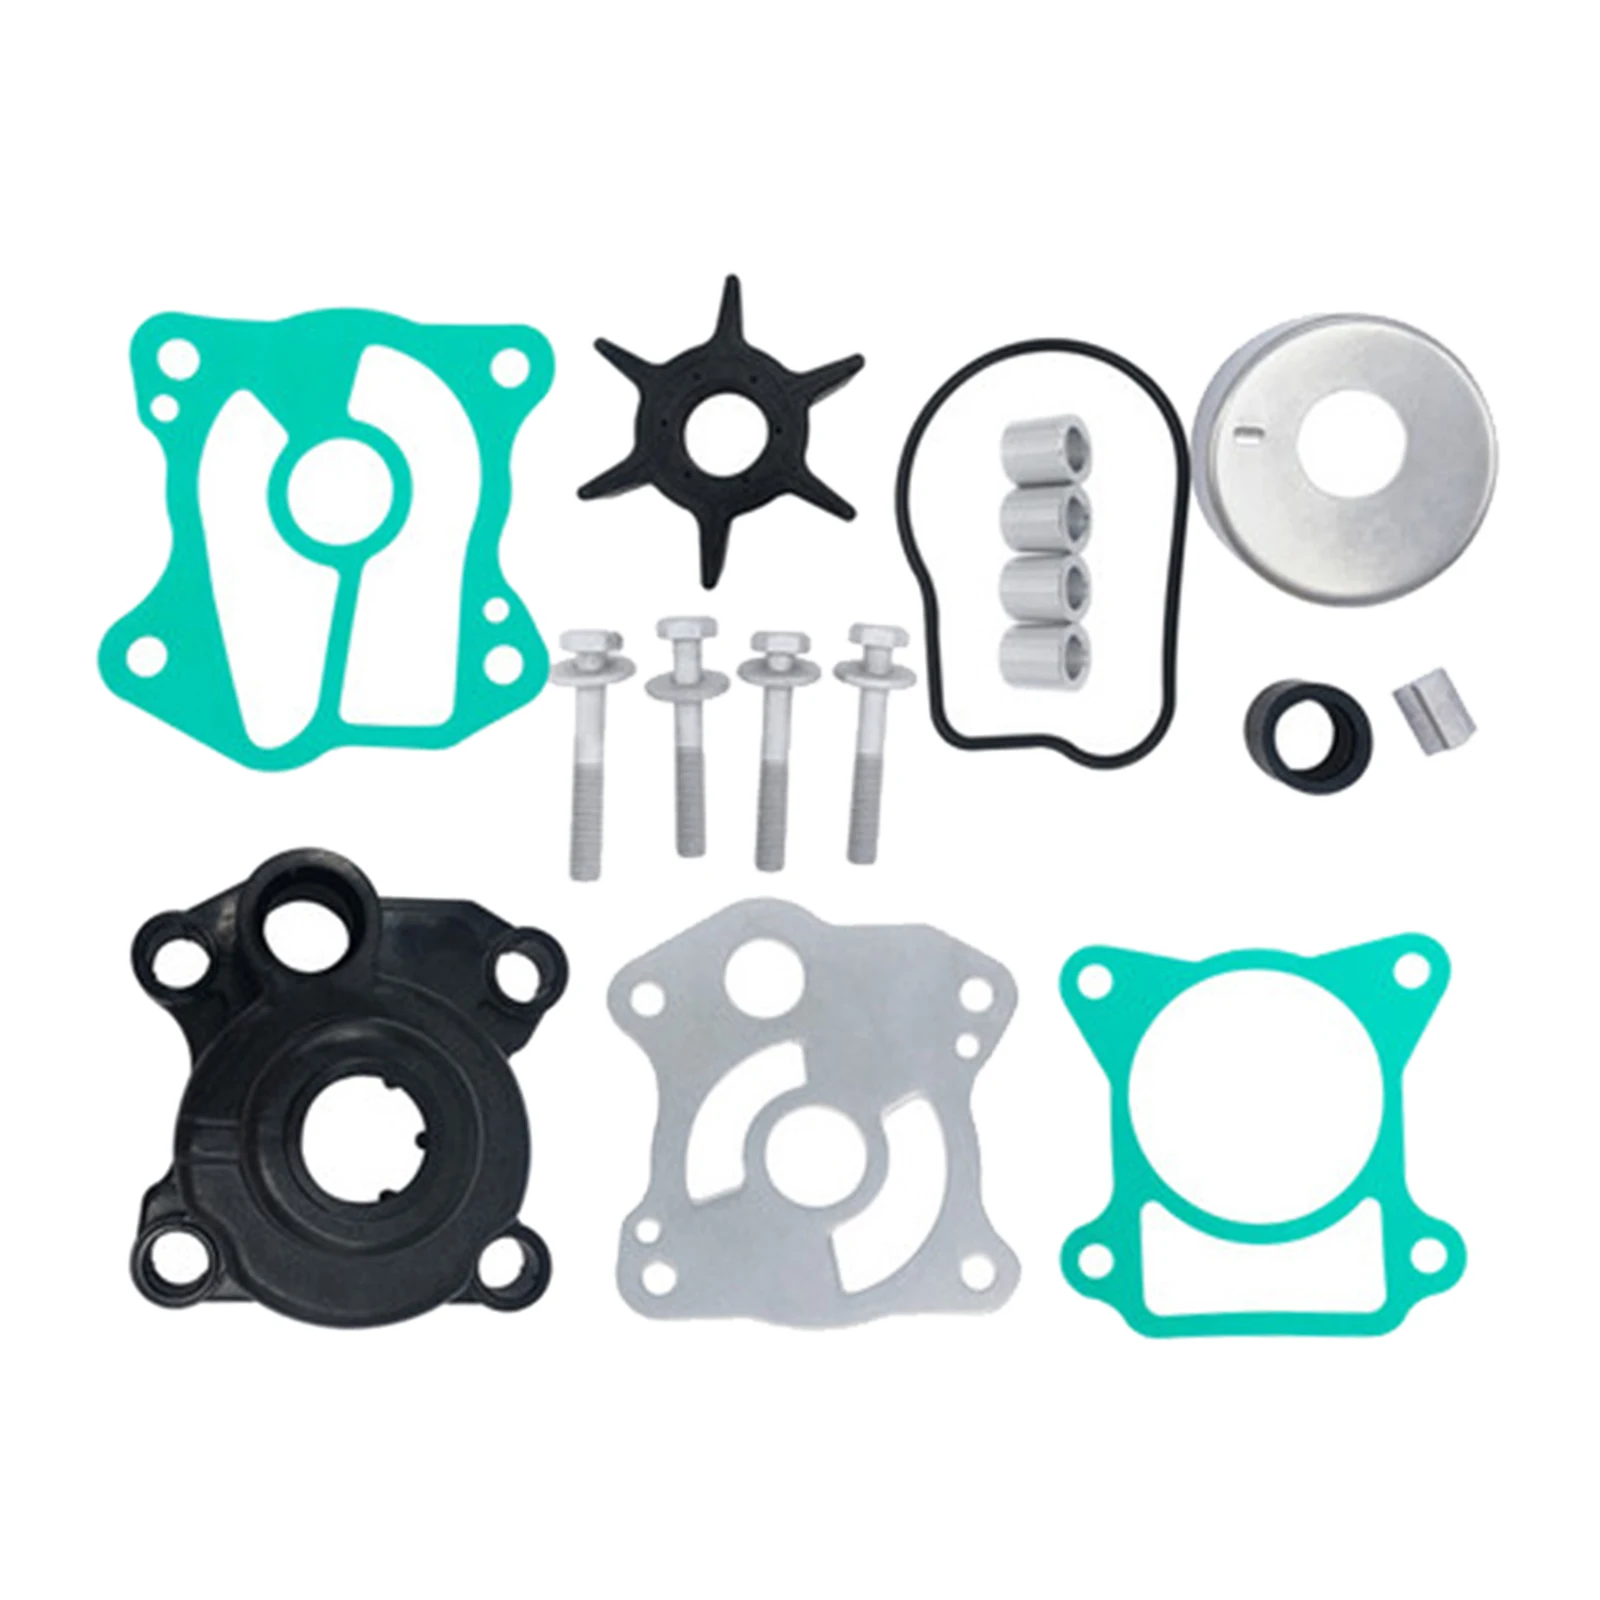 Water Pump Impeller Kit for Honda BF50A BF50D 06193-ZV5-020 06193-ZV5-010 06193-ZV5-000 Outboard Engines